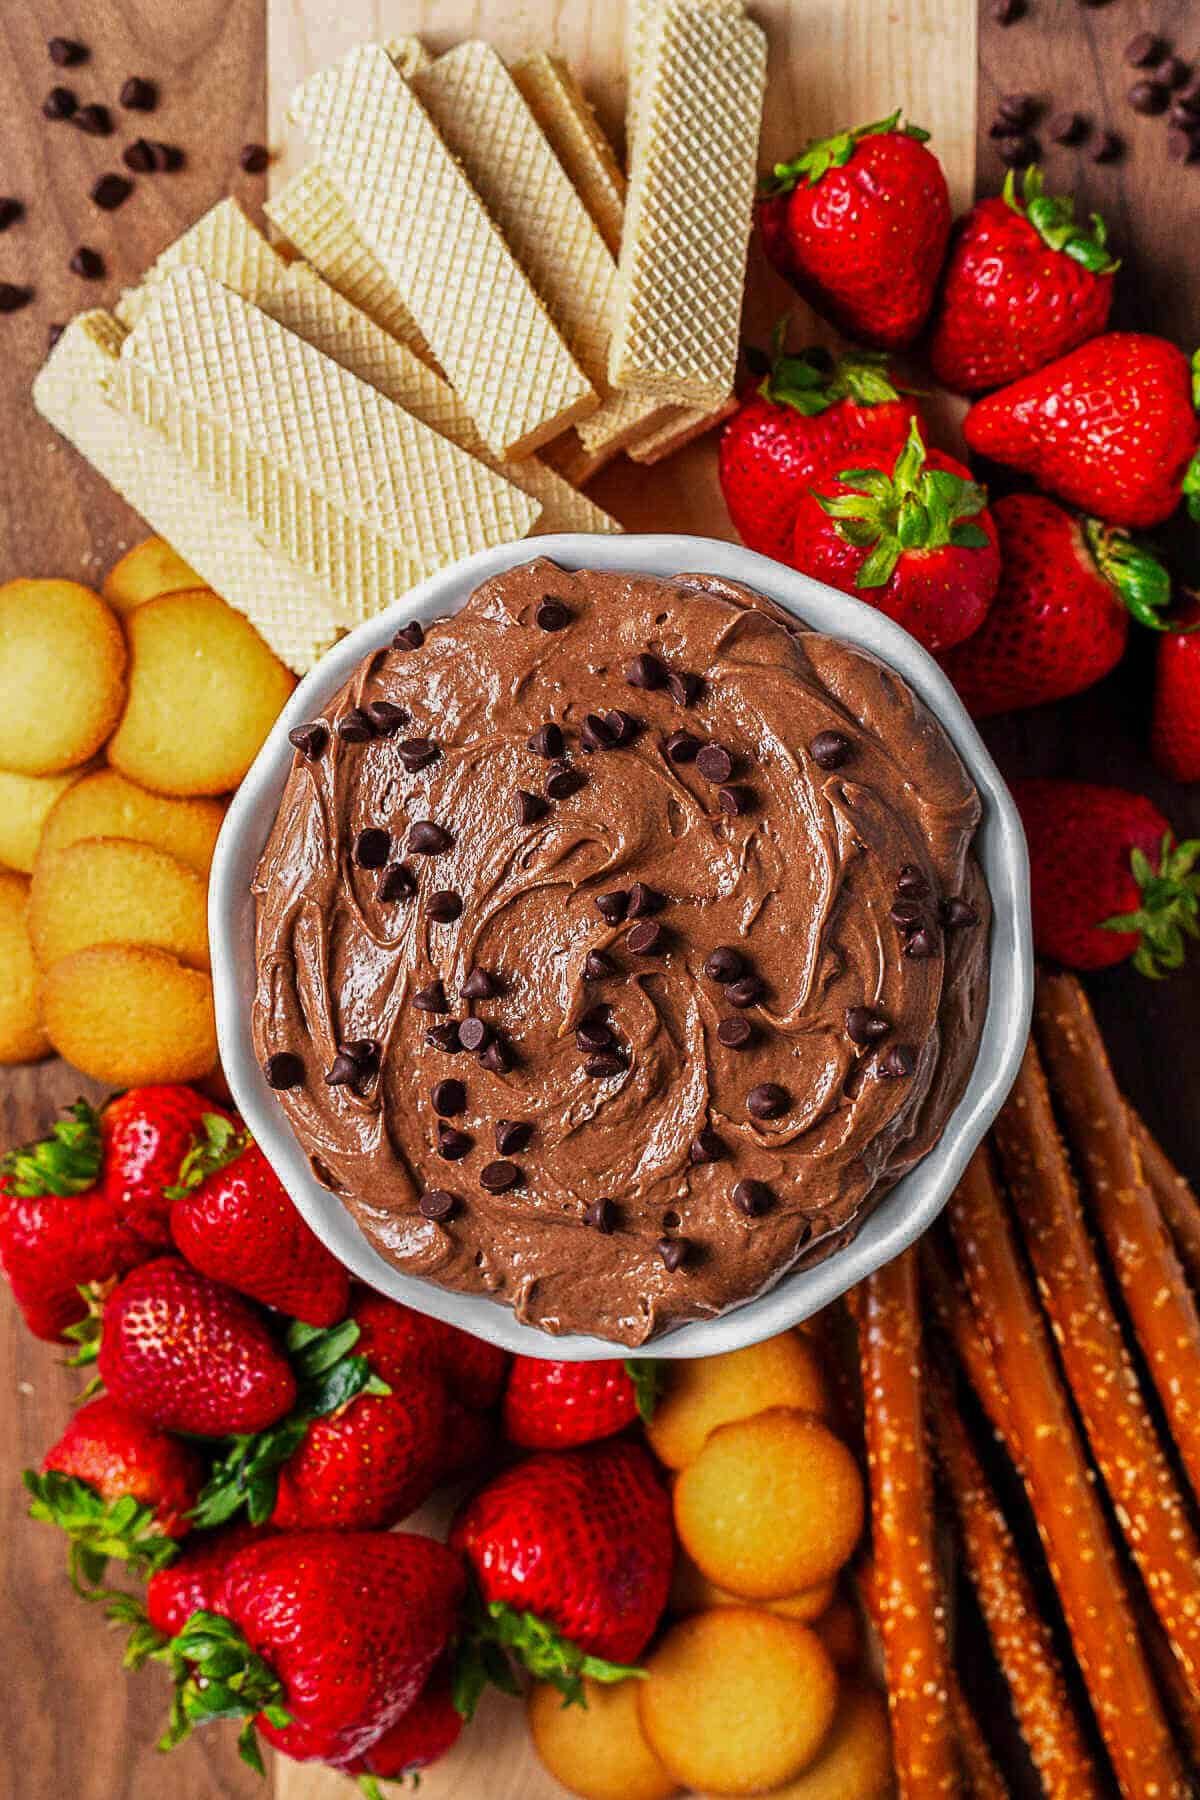 Brownie Batter Dip in a bowl on a wooden board surrounded by strawberries, nilla wafers, cookies, and pretzel rods for dipping.